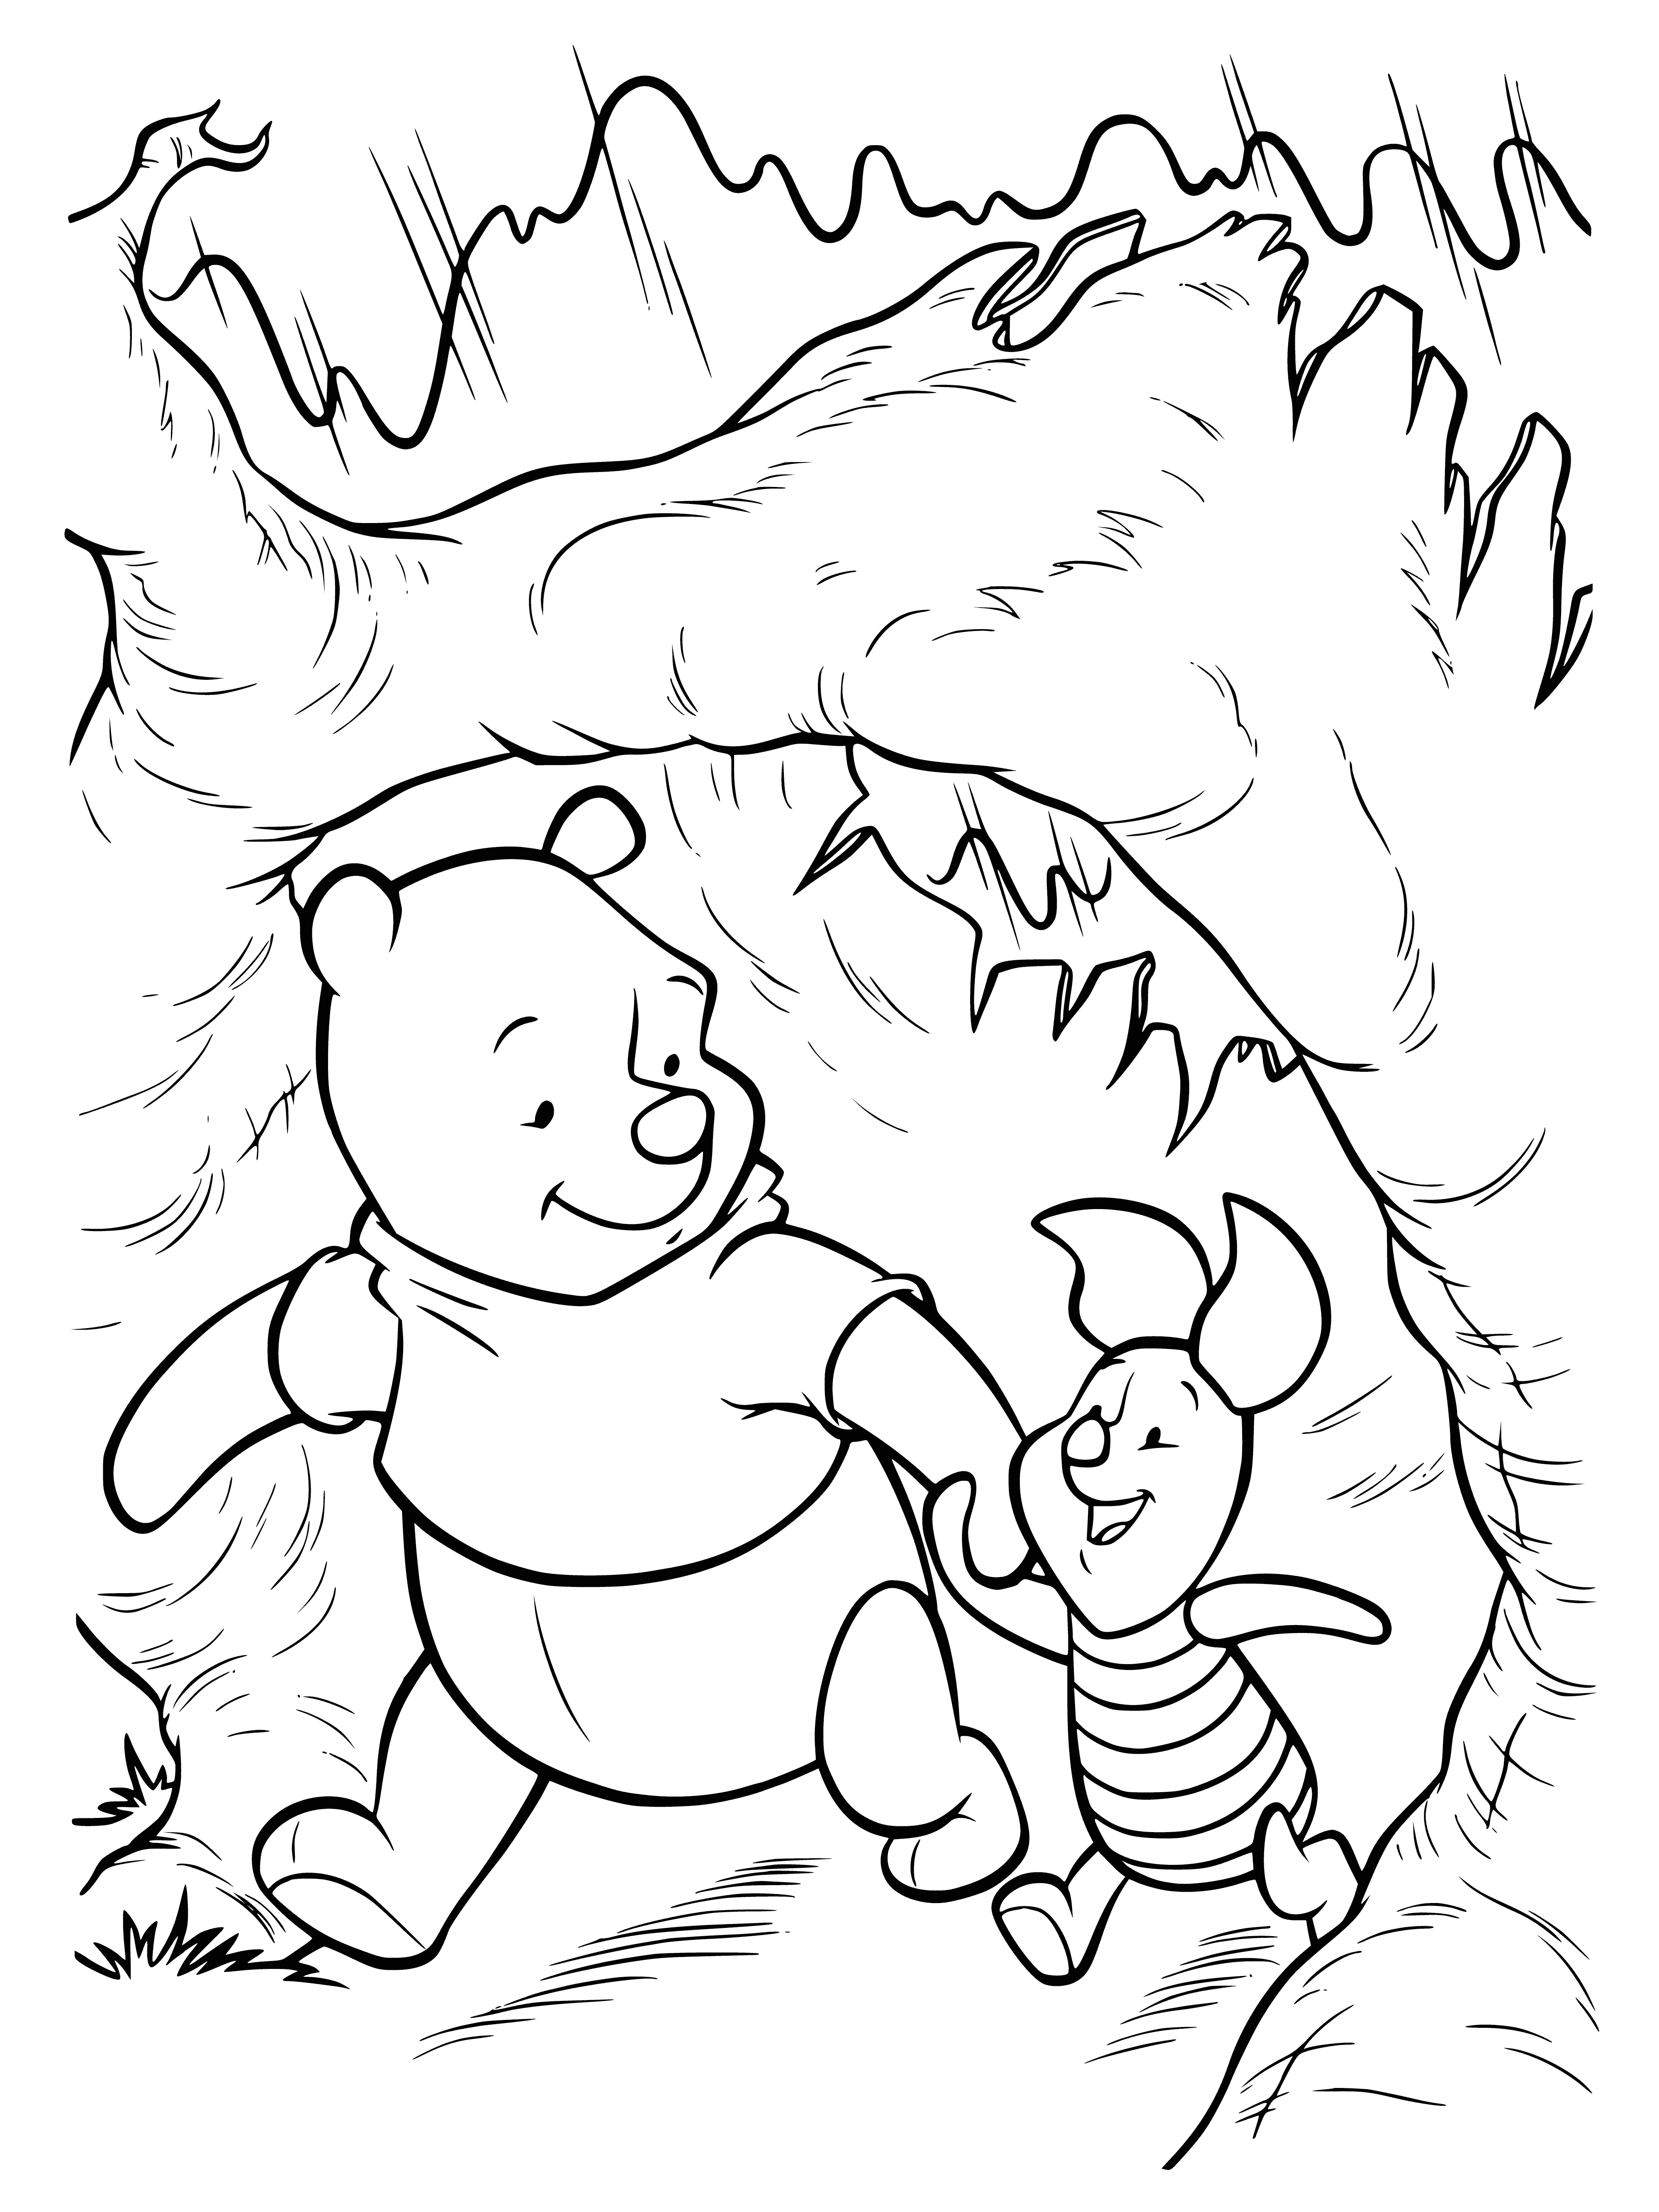 coloring page: Winnie the Pooh lovingly embraces a pig, looking deeply into each other's eyes.